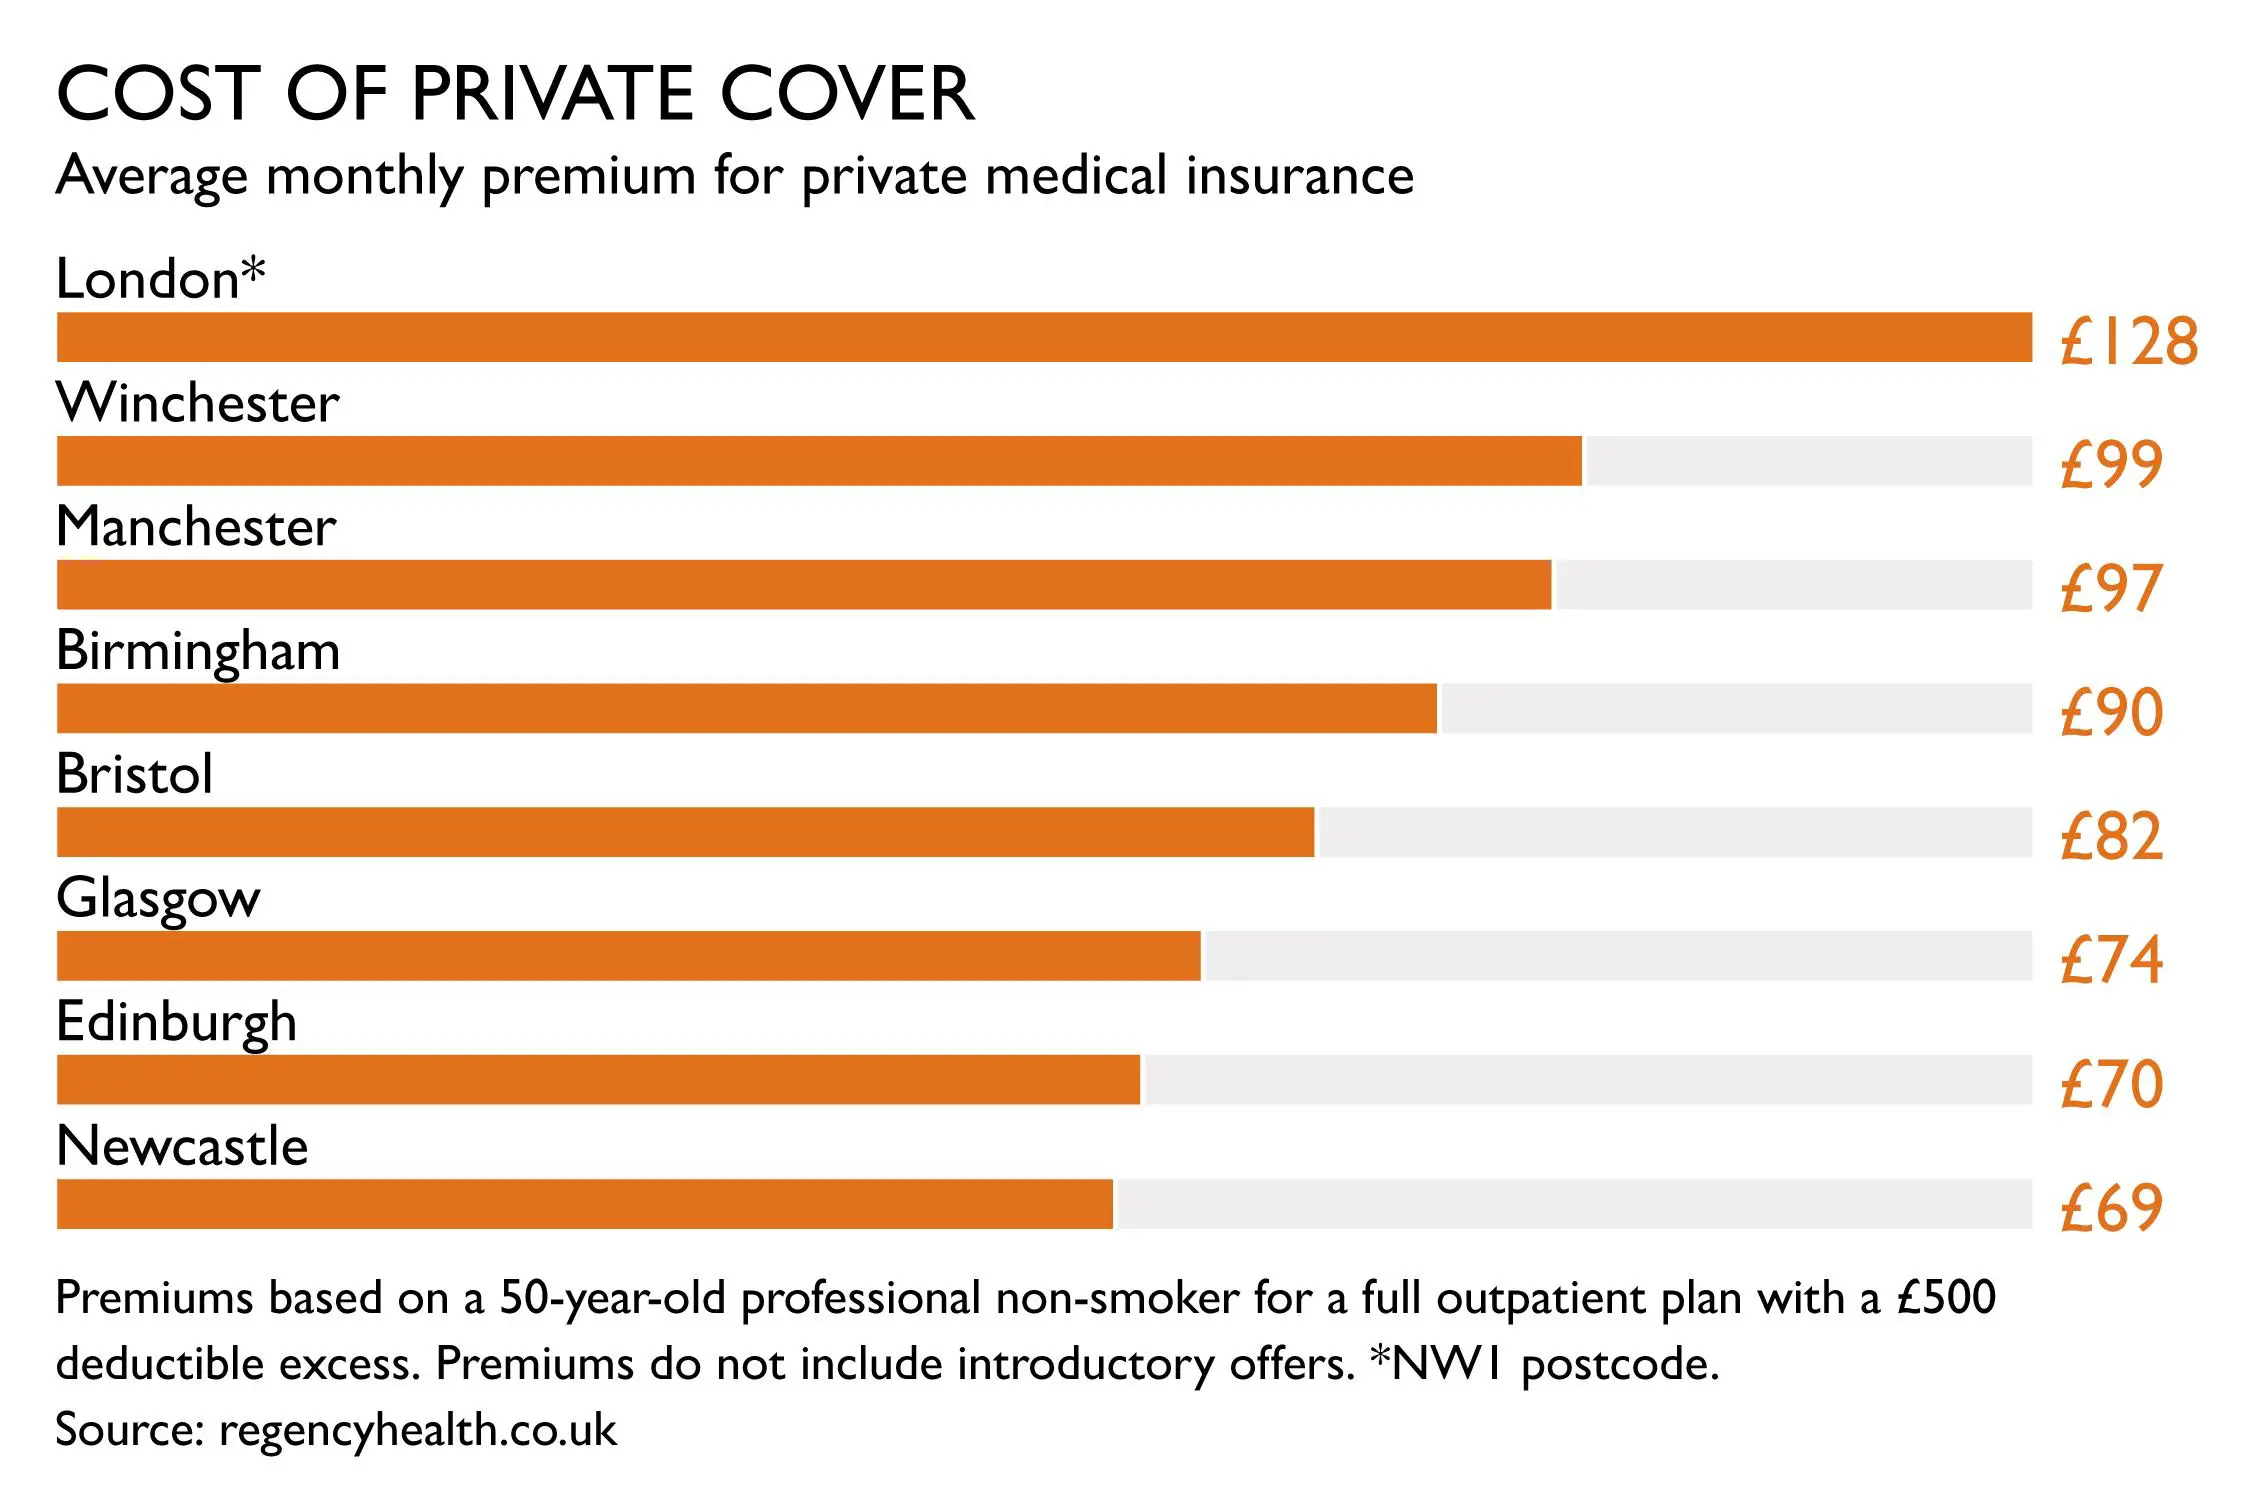 Private health insurance costs double in London